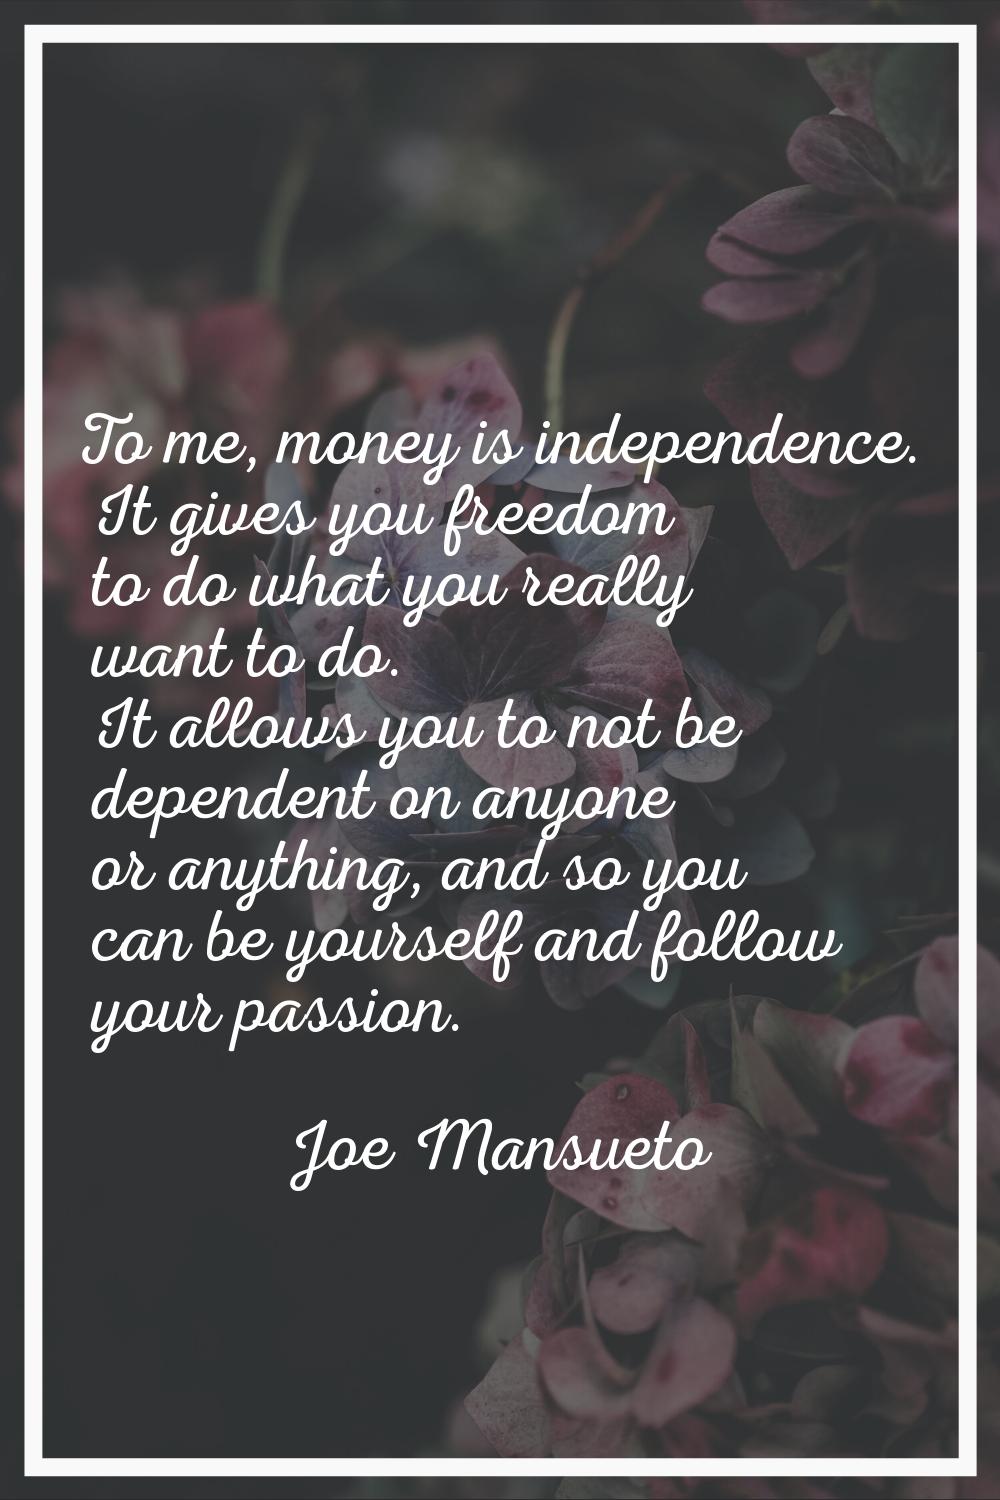 To me, money is independence. It gives you freedom to do what you really want to do. It allows you 